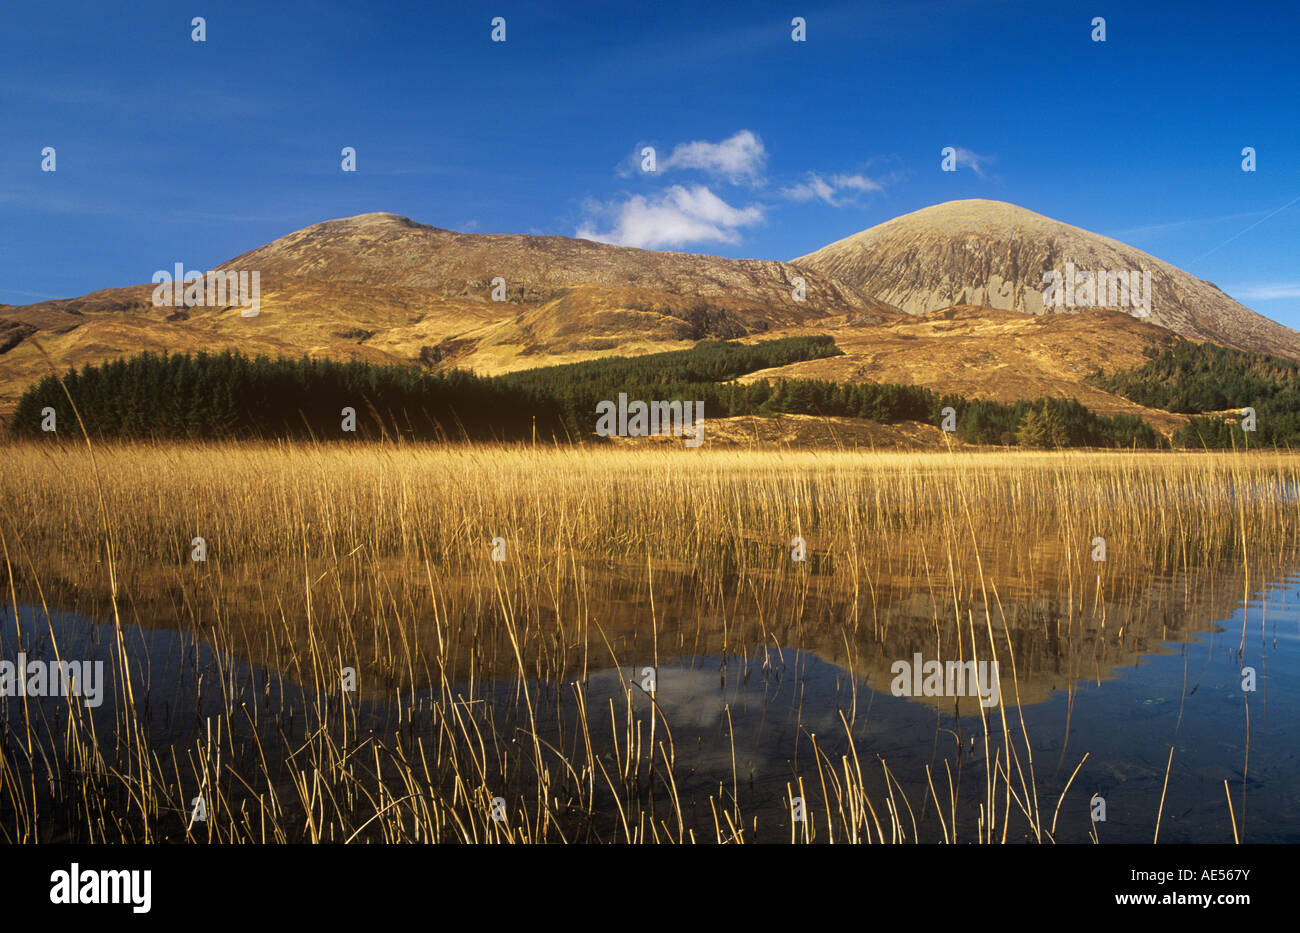 Reflections in Loch Cill Chriosd, Skye Stock Photo